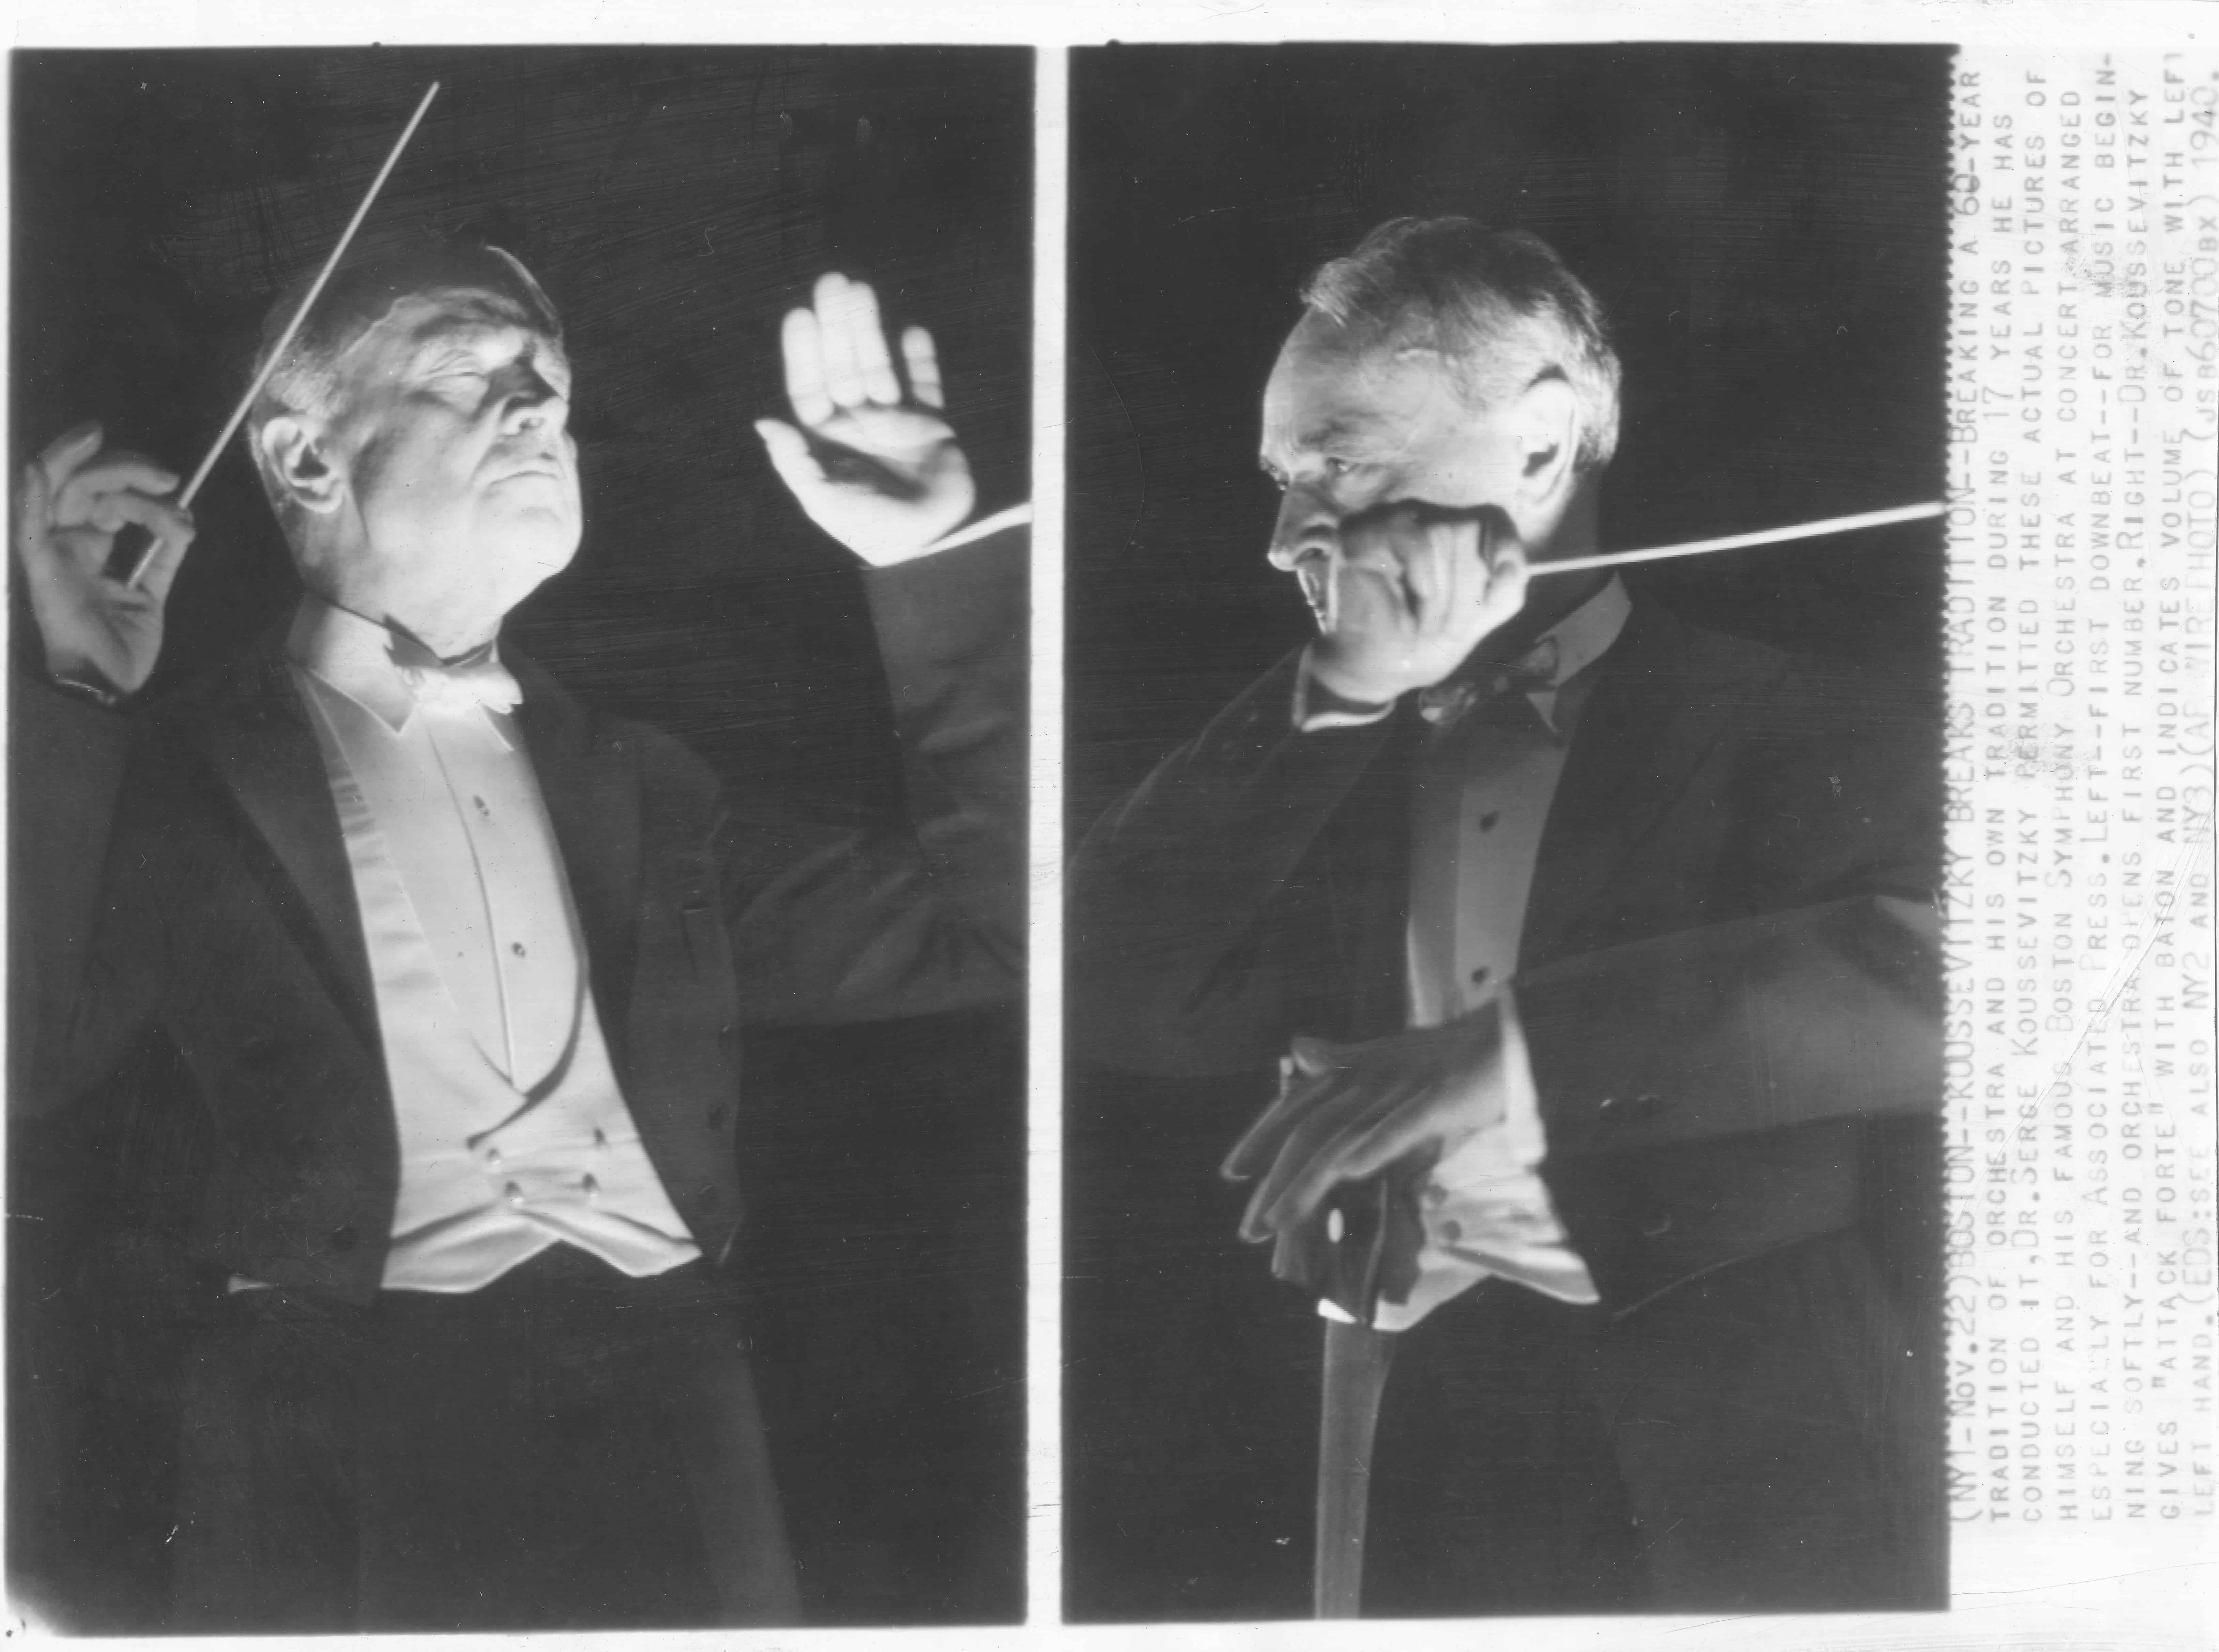 Serge Koussevitzky conducting (2 images side by side)